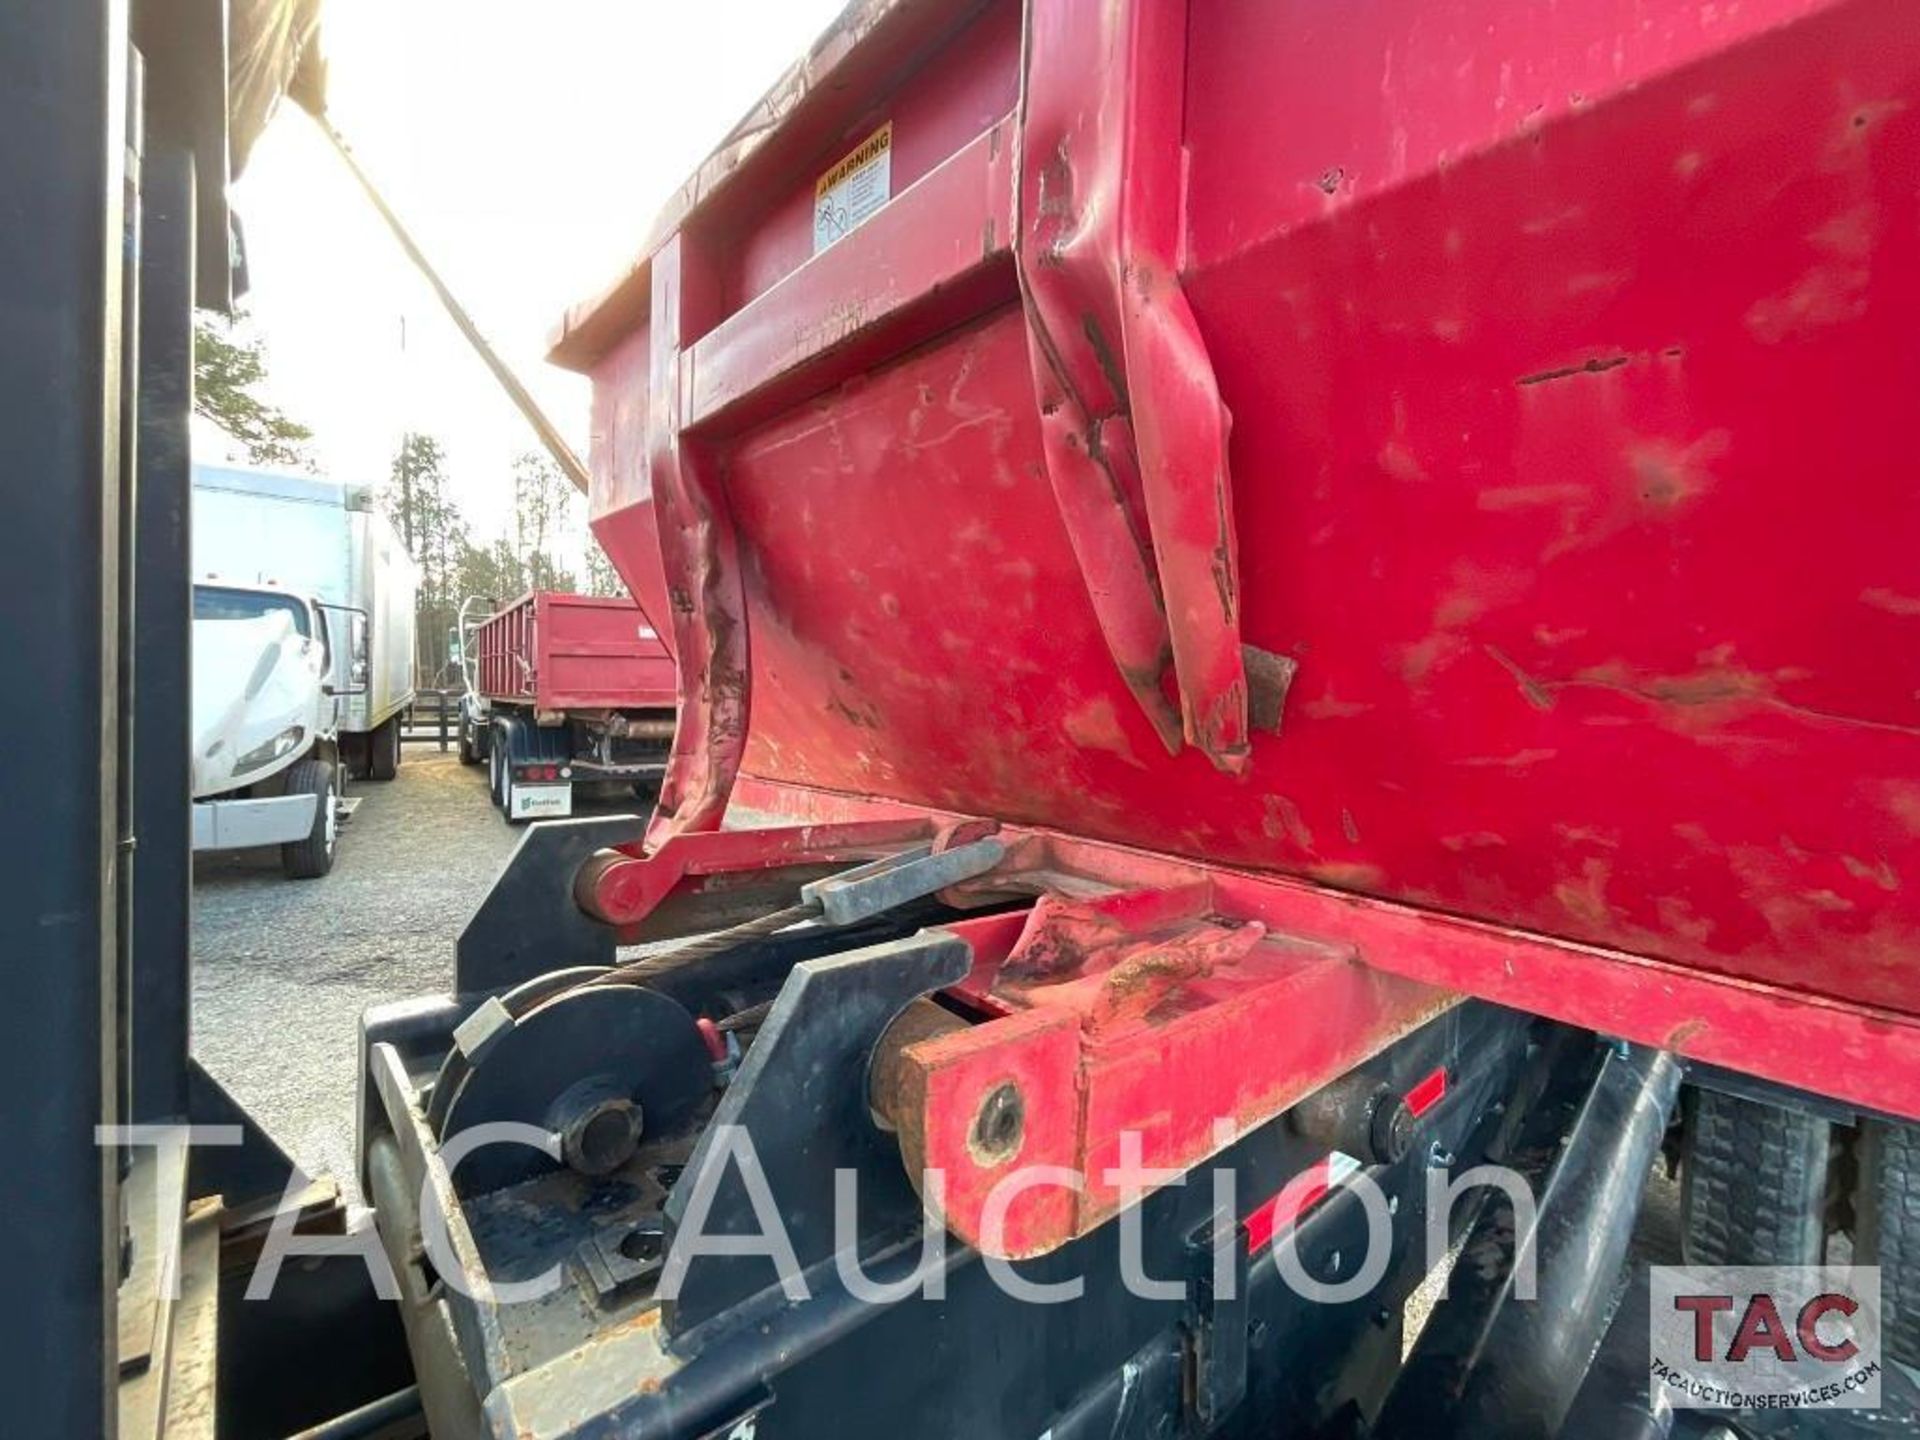 2012 CAT CT660S Roll-Off Truck W/ 20yd Dumpster - Image 20 of 148